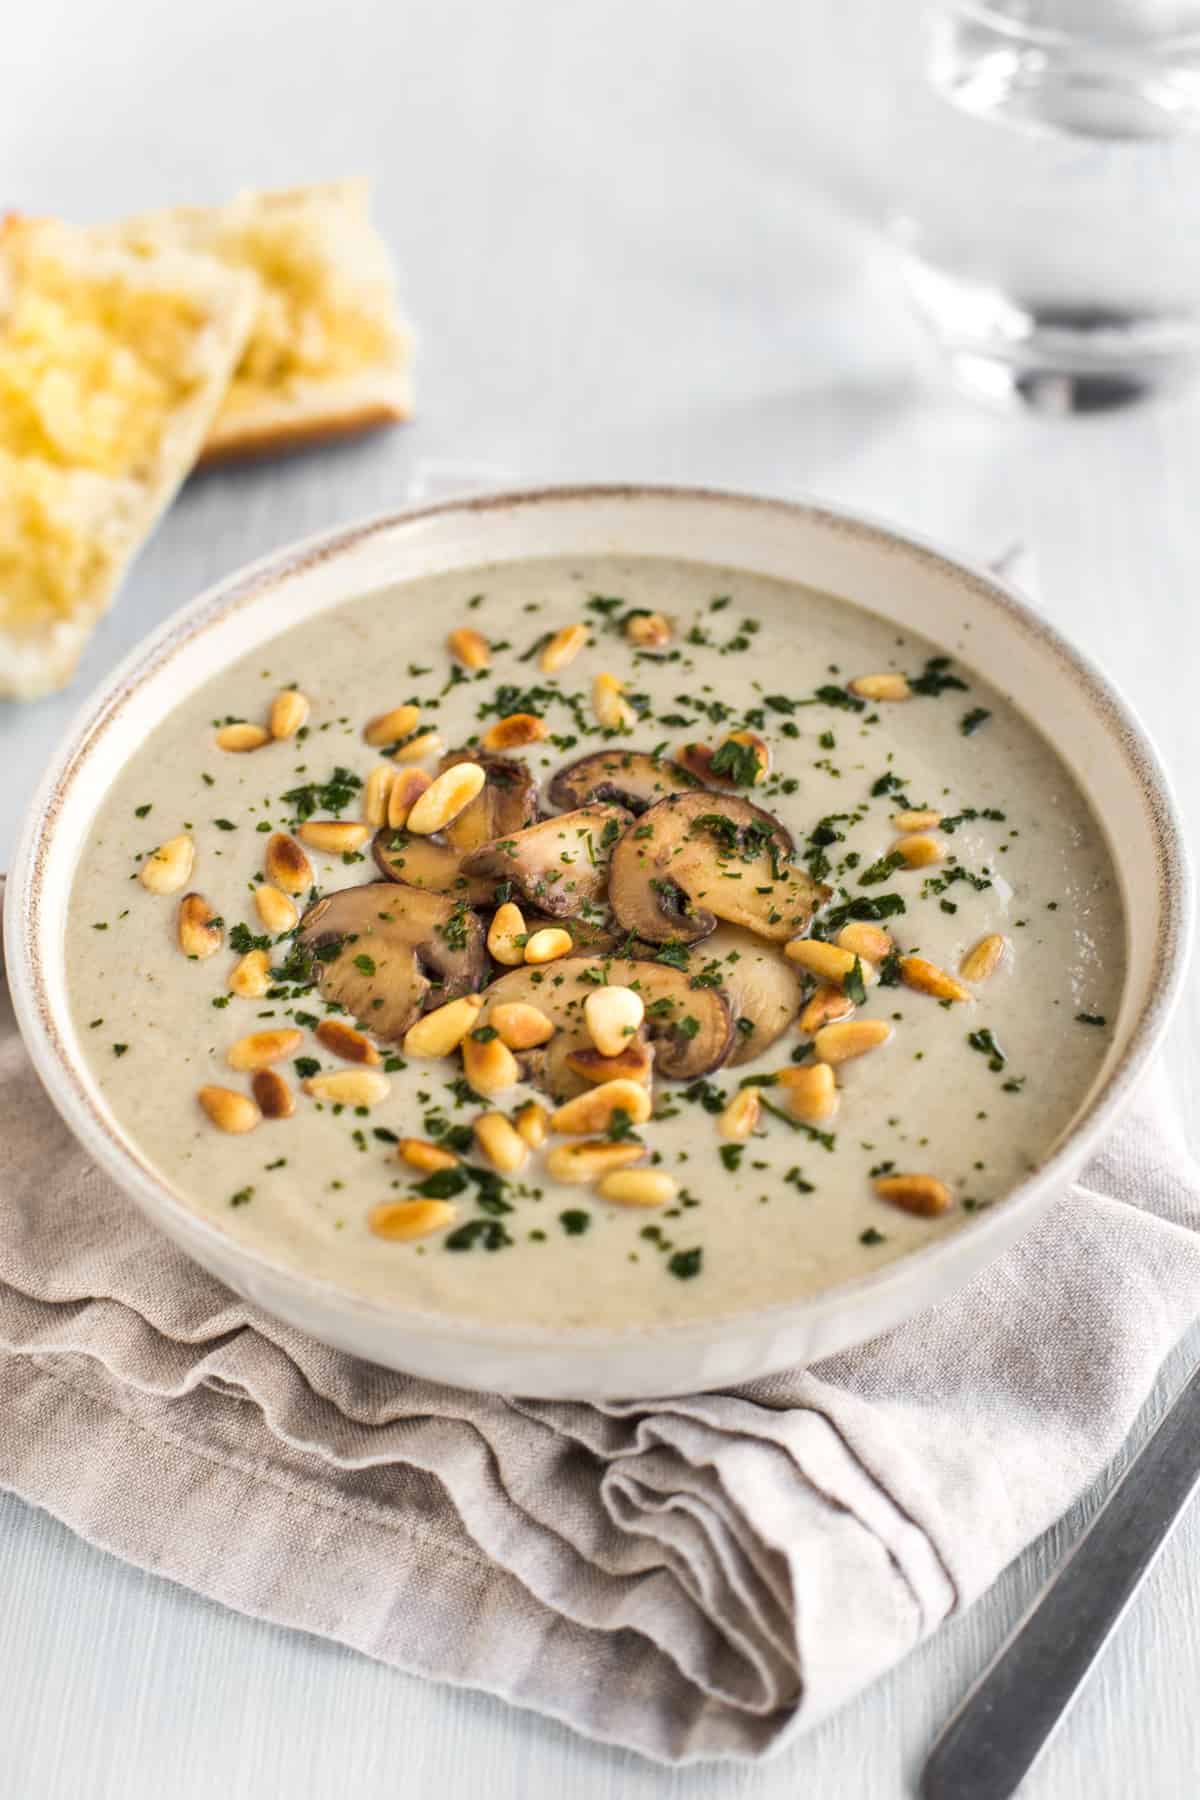 Bowl of creamy vegan mushroom soup topped with garlic sautéed mushrooms and toasted pine nuts.